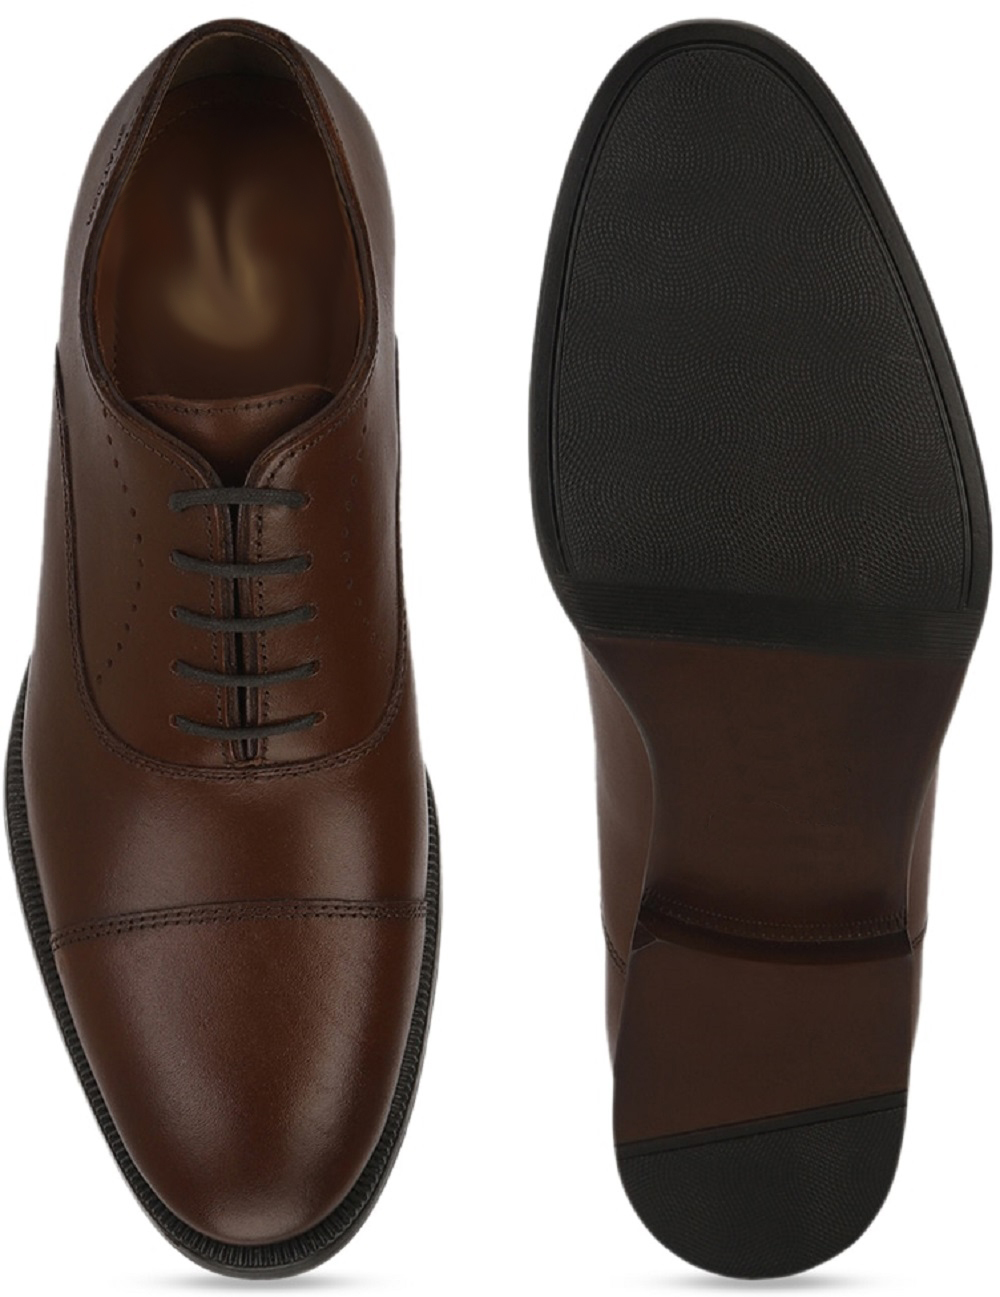 Customize Chocolate Brown Shoes, Oxford Formal Shoes, Handmade Leather Shoes,